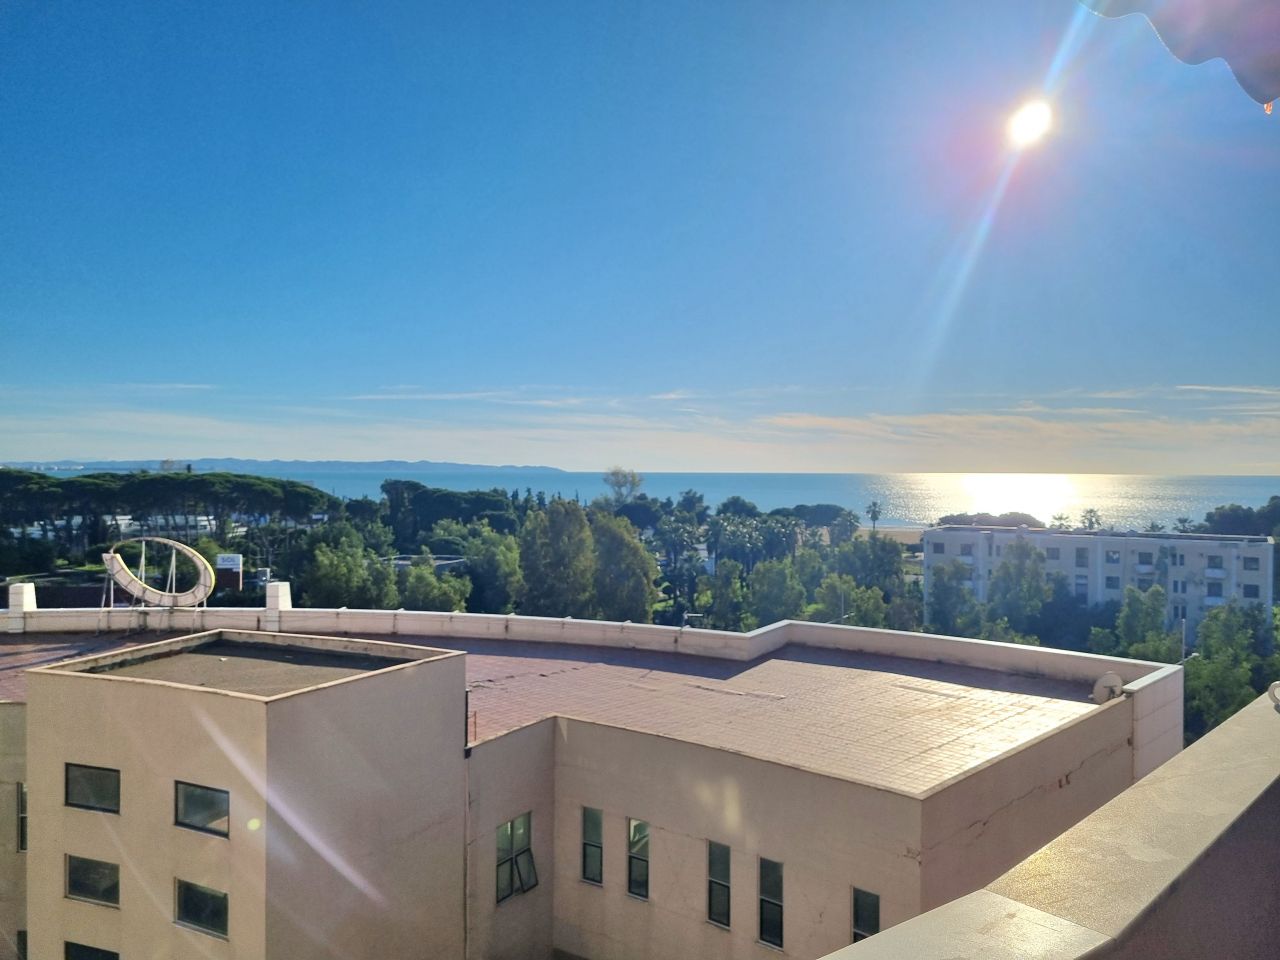 Sea View Property In Durres For Sale With A Full Furniture Package Included And A Really Nice Sea View From The Balconies